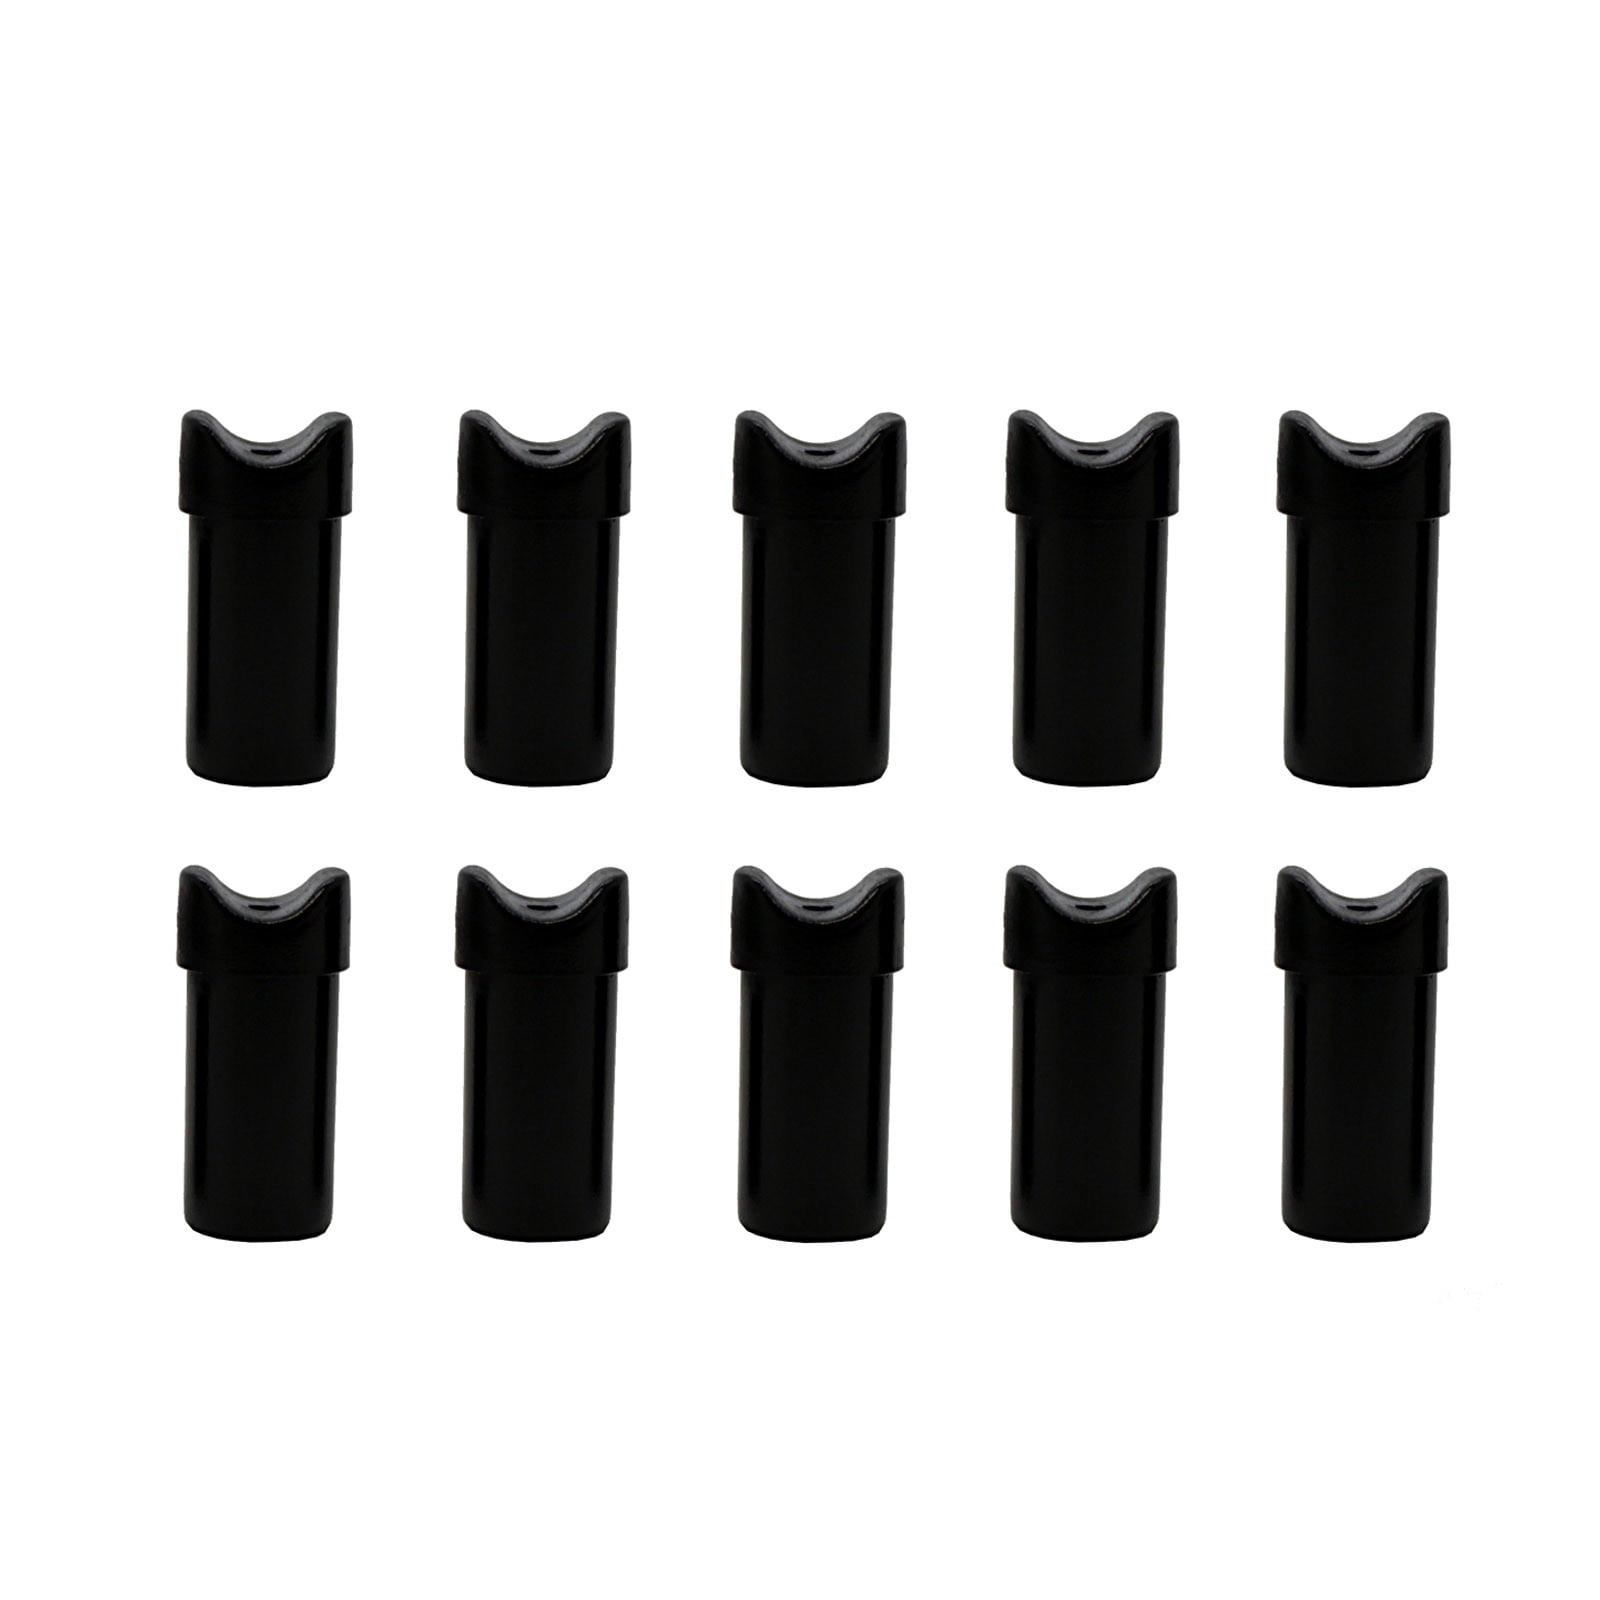 30/pack SAS Replacement Half Moon Nock End For Aluminum Crossbow Arrows Bolts 